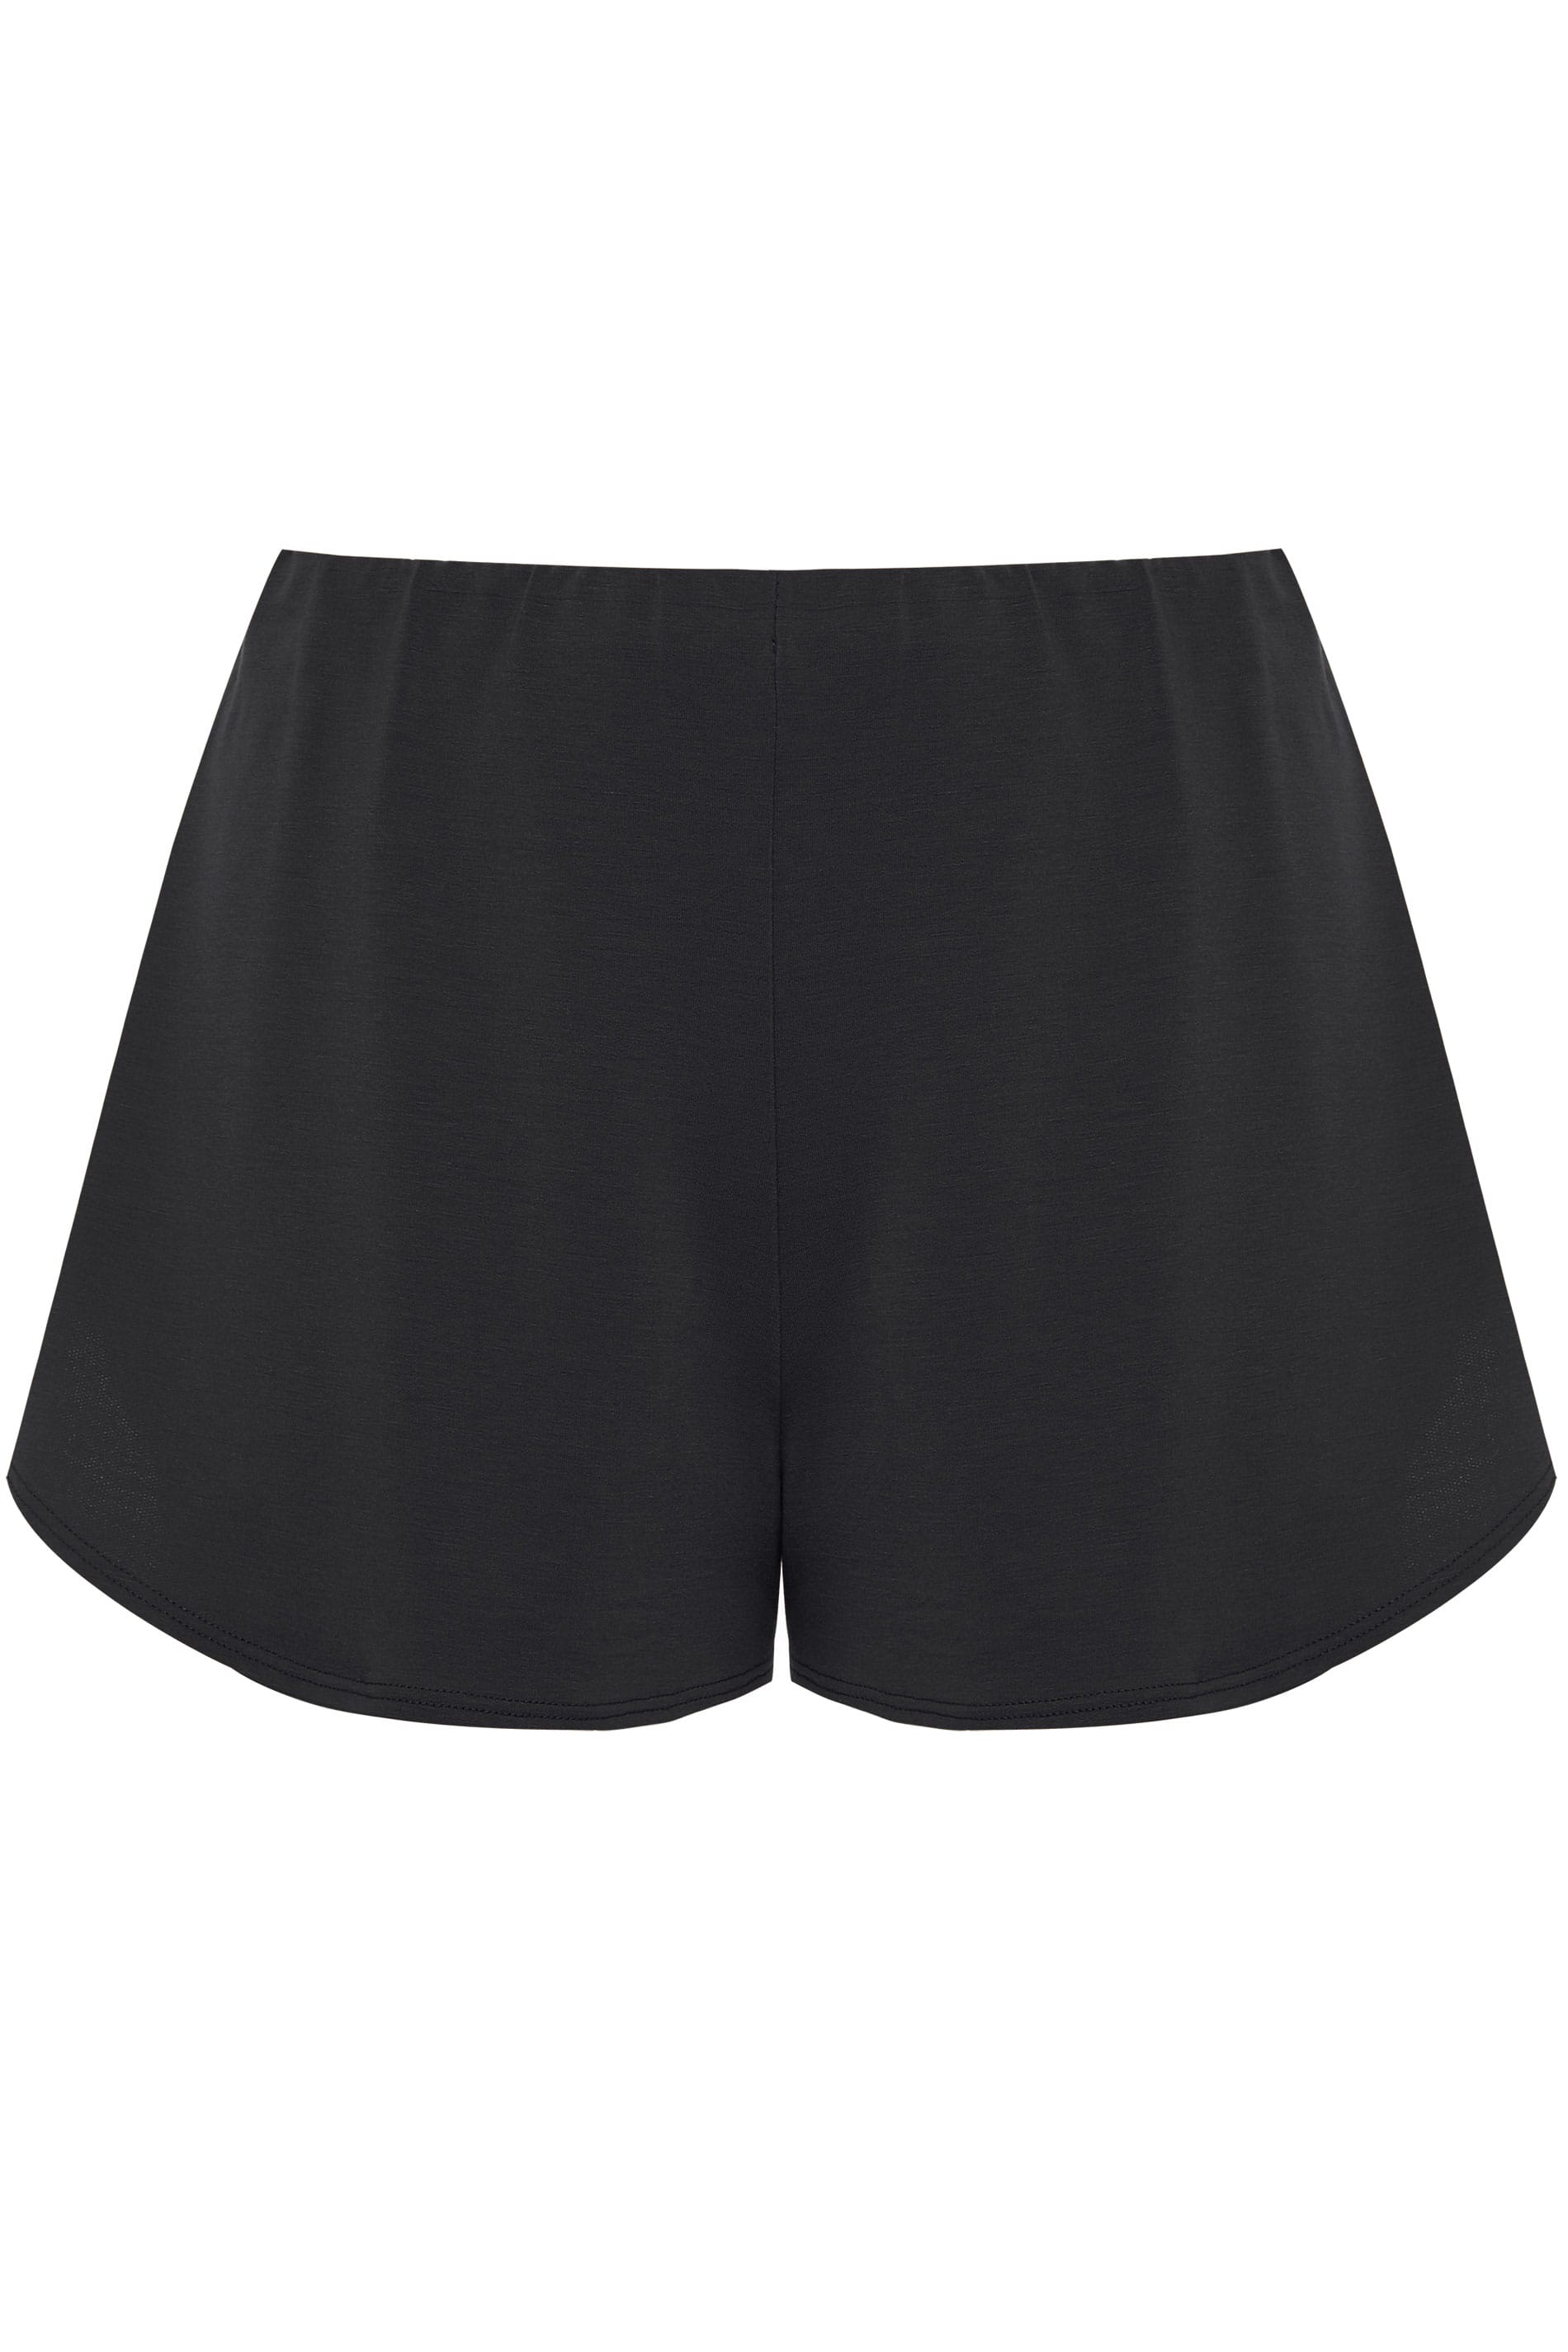 LIMITED COLLECTION Black Lounge Shorts | Yours Clothing